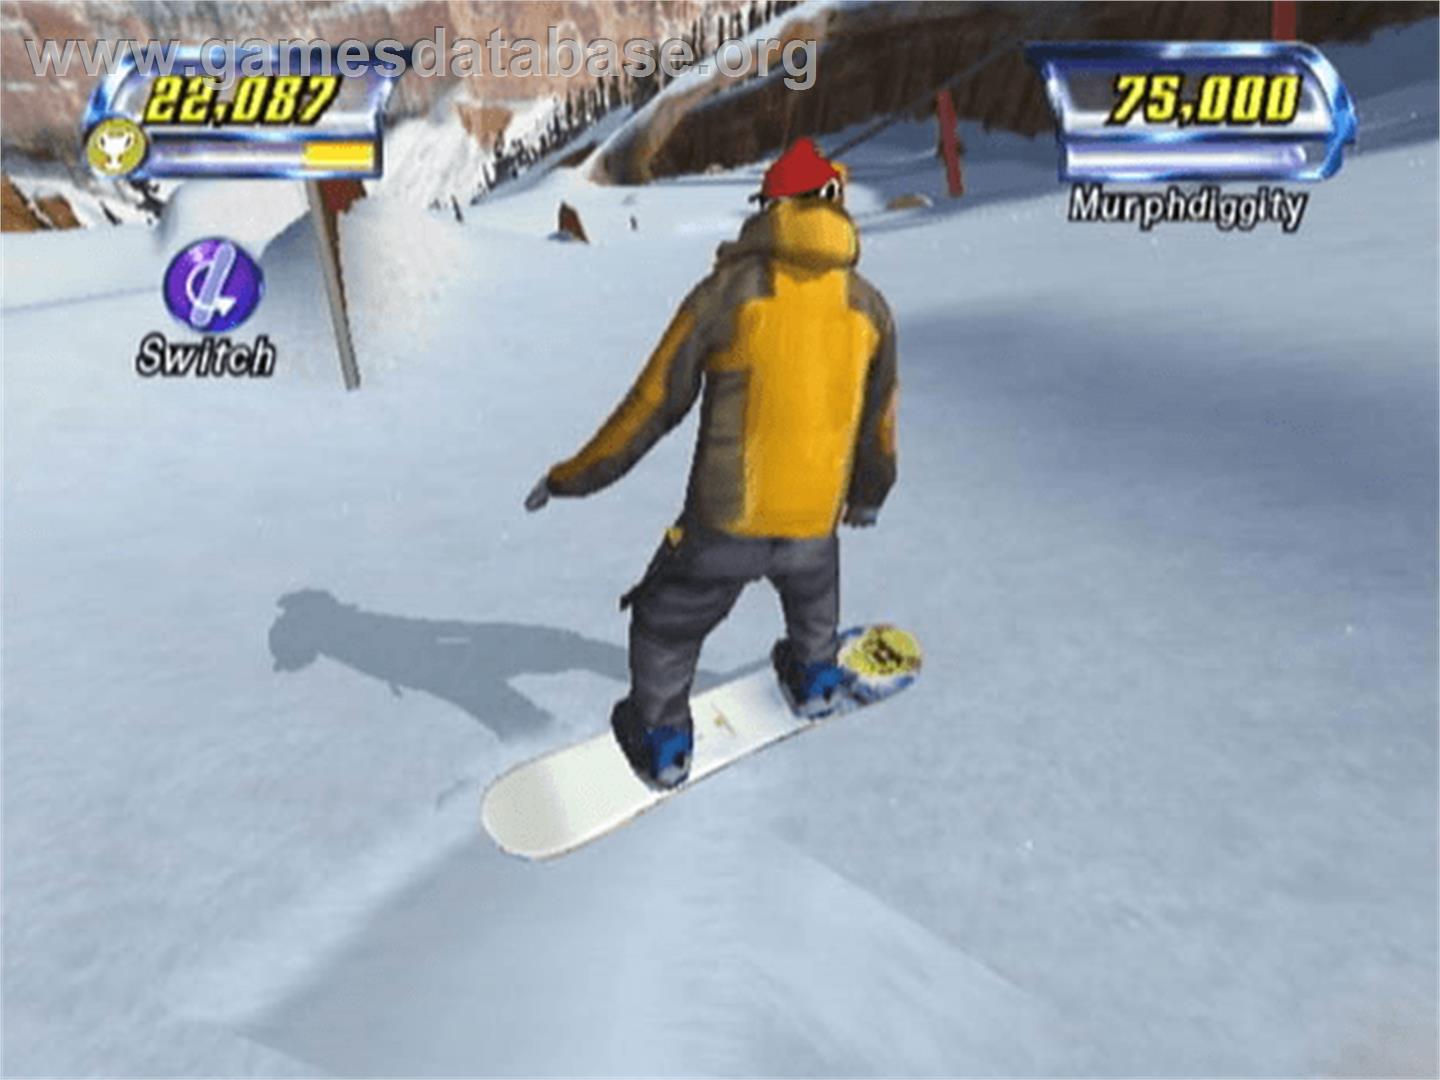 Amped: Freestyle Snowboarding - Microsoft Xbox - Artwork - In Game